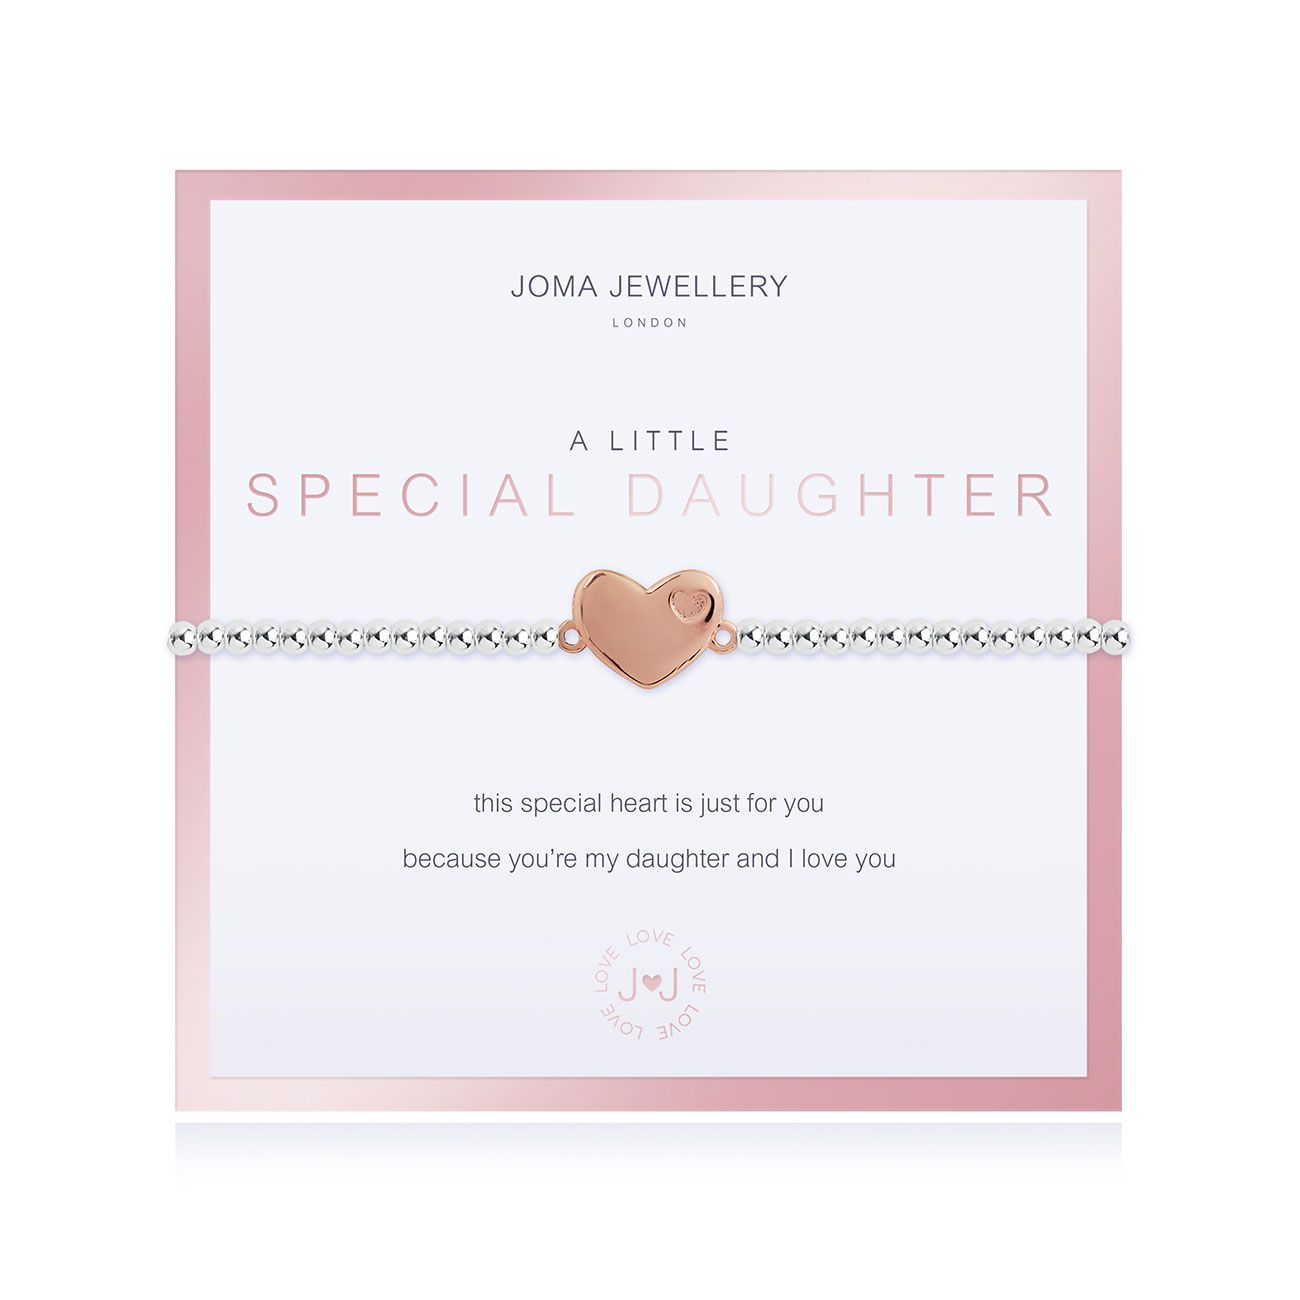 Joma Jewellery a little Special Daughter Boxed Bracelet - heart